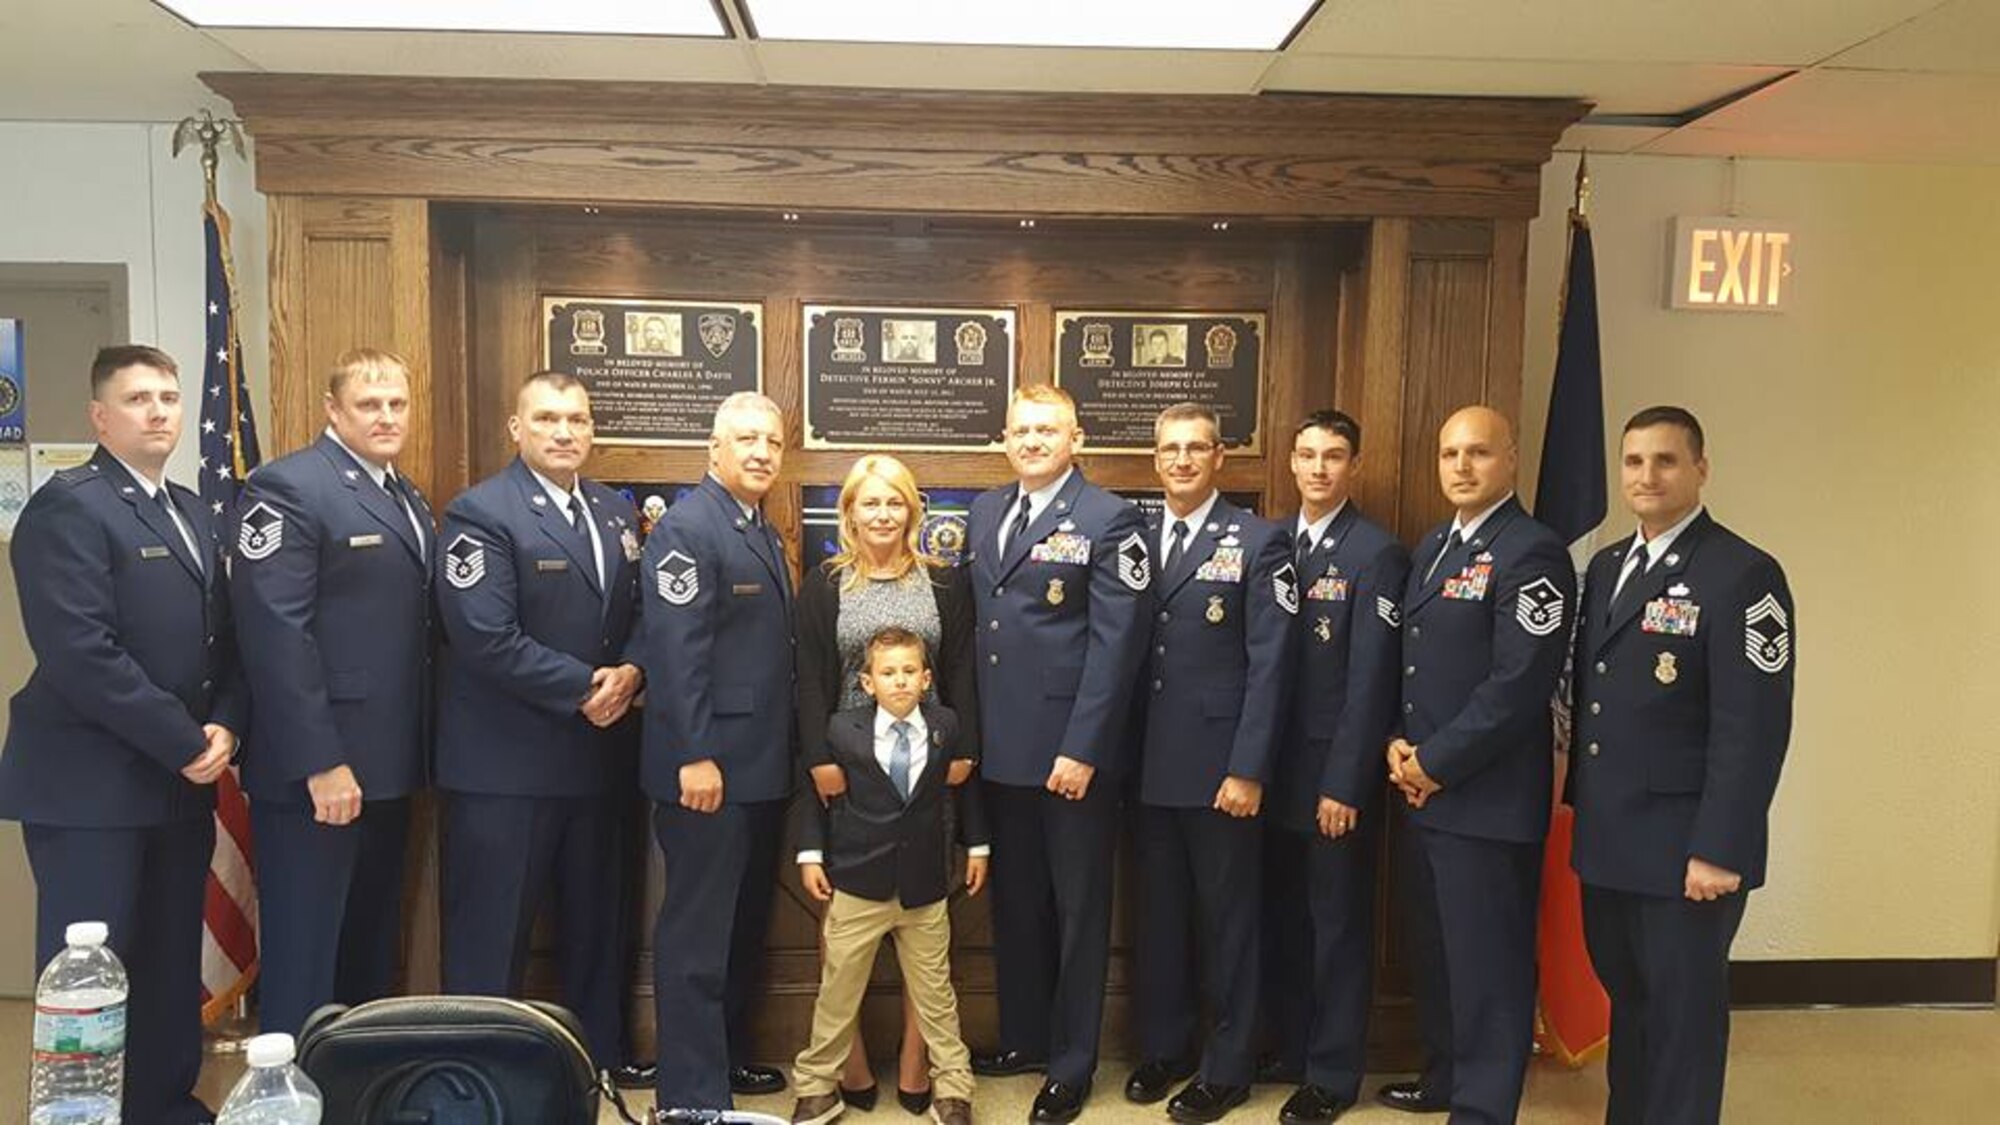 Airmen assigned to the 820th Base Defense Group and 105th Base Defense Squadron pose for a photo with Tech. Sgt. Joseph Lemm’s wife,  Christine DeGuisto and son, Ryan, during a memorial service, Oct. 17, 2017, at the 84 Precinct station house, in Brooklyn, NY. While Lemm was a member of the 105th BDS, the unit trains closely and often deploys with the 820th BDG. Due to the high-stress training and deployments, the lines begin to blur and these Airmen become close-knit families. (Courtesy photo)